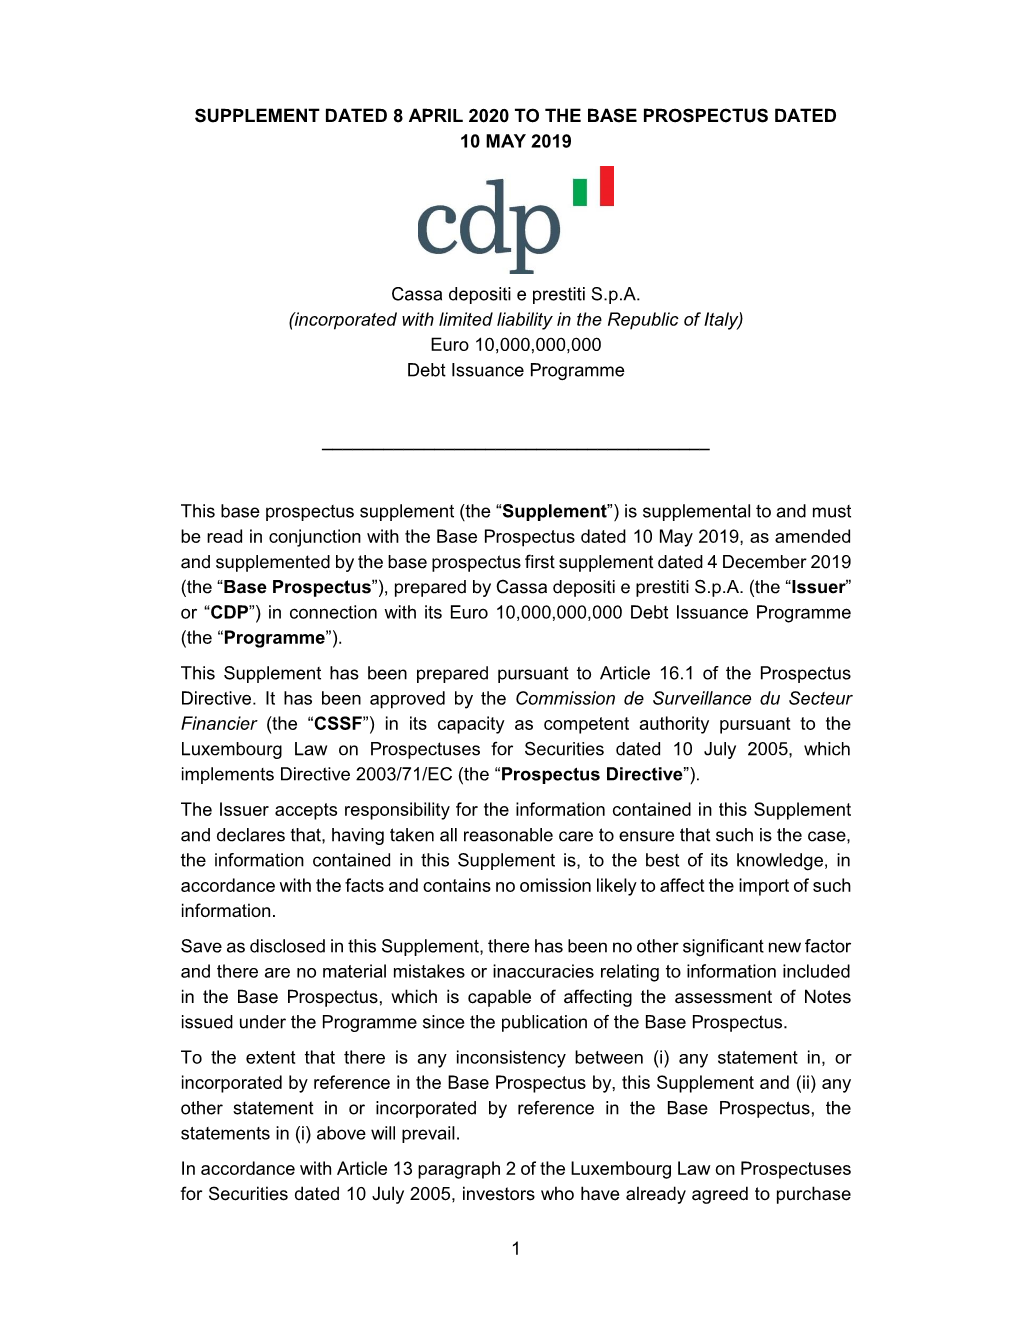 Cassa Depositi E Prestiti S.P.A. (Incorporated with Limited Liability in the Republic of Italy) Euro 10,000,000,000 Debt Issuance Programme